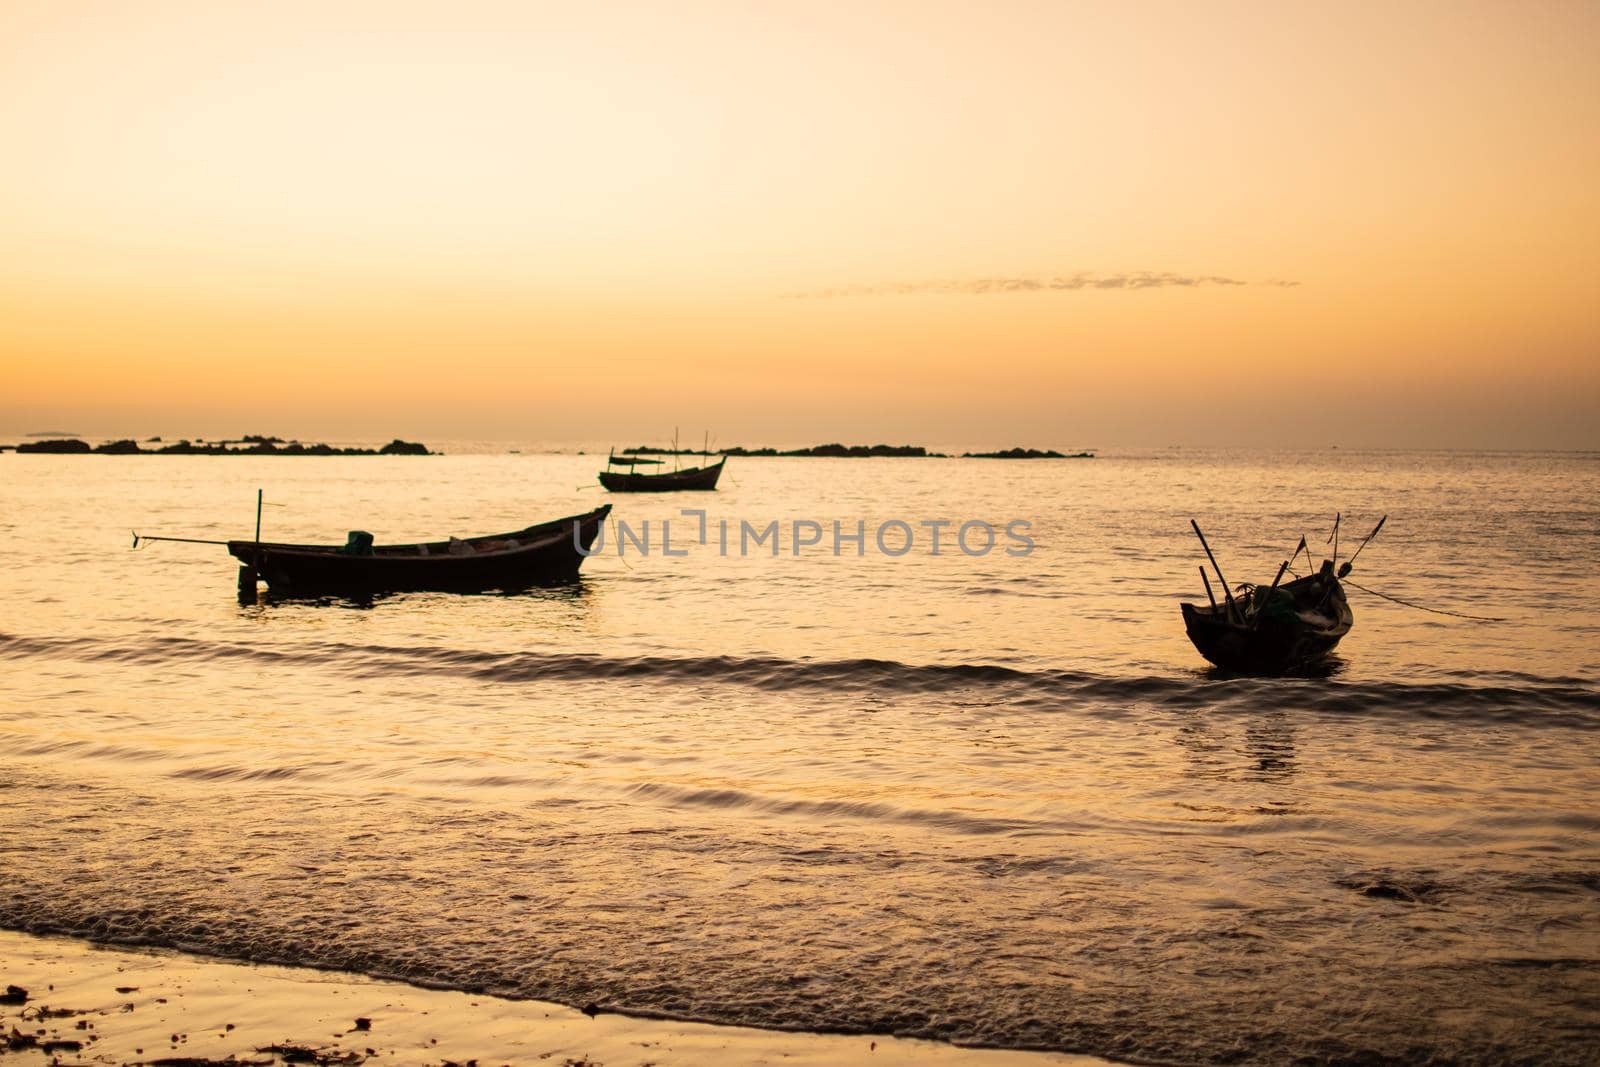 Three traditional wooden boats in a bright orange sunset, Ngwesaung, Myanmar by arvidnorberg